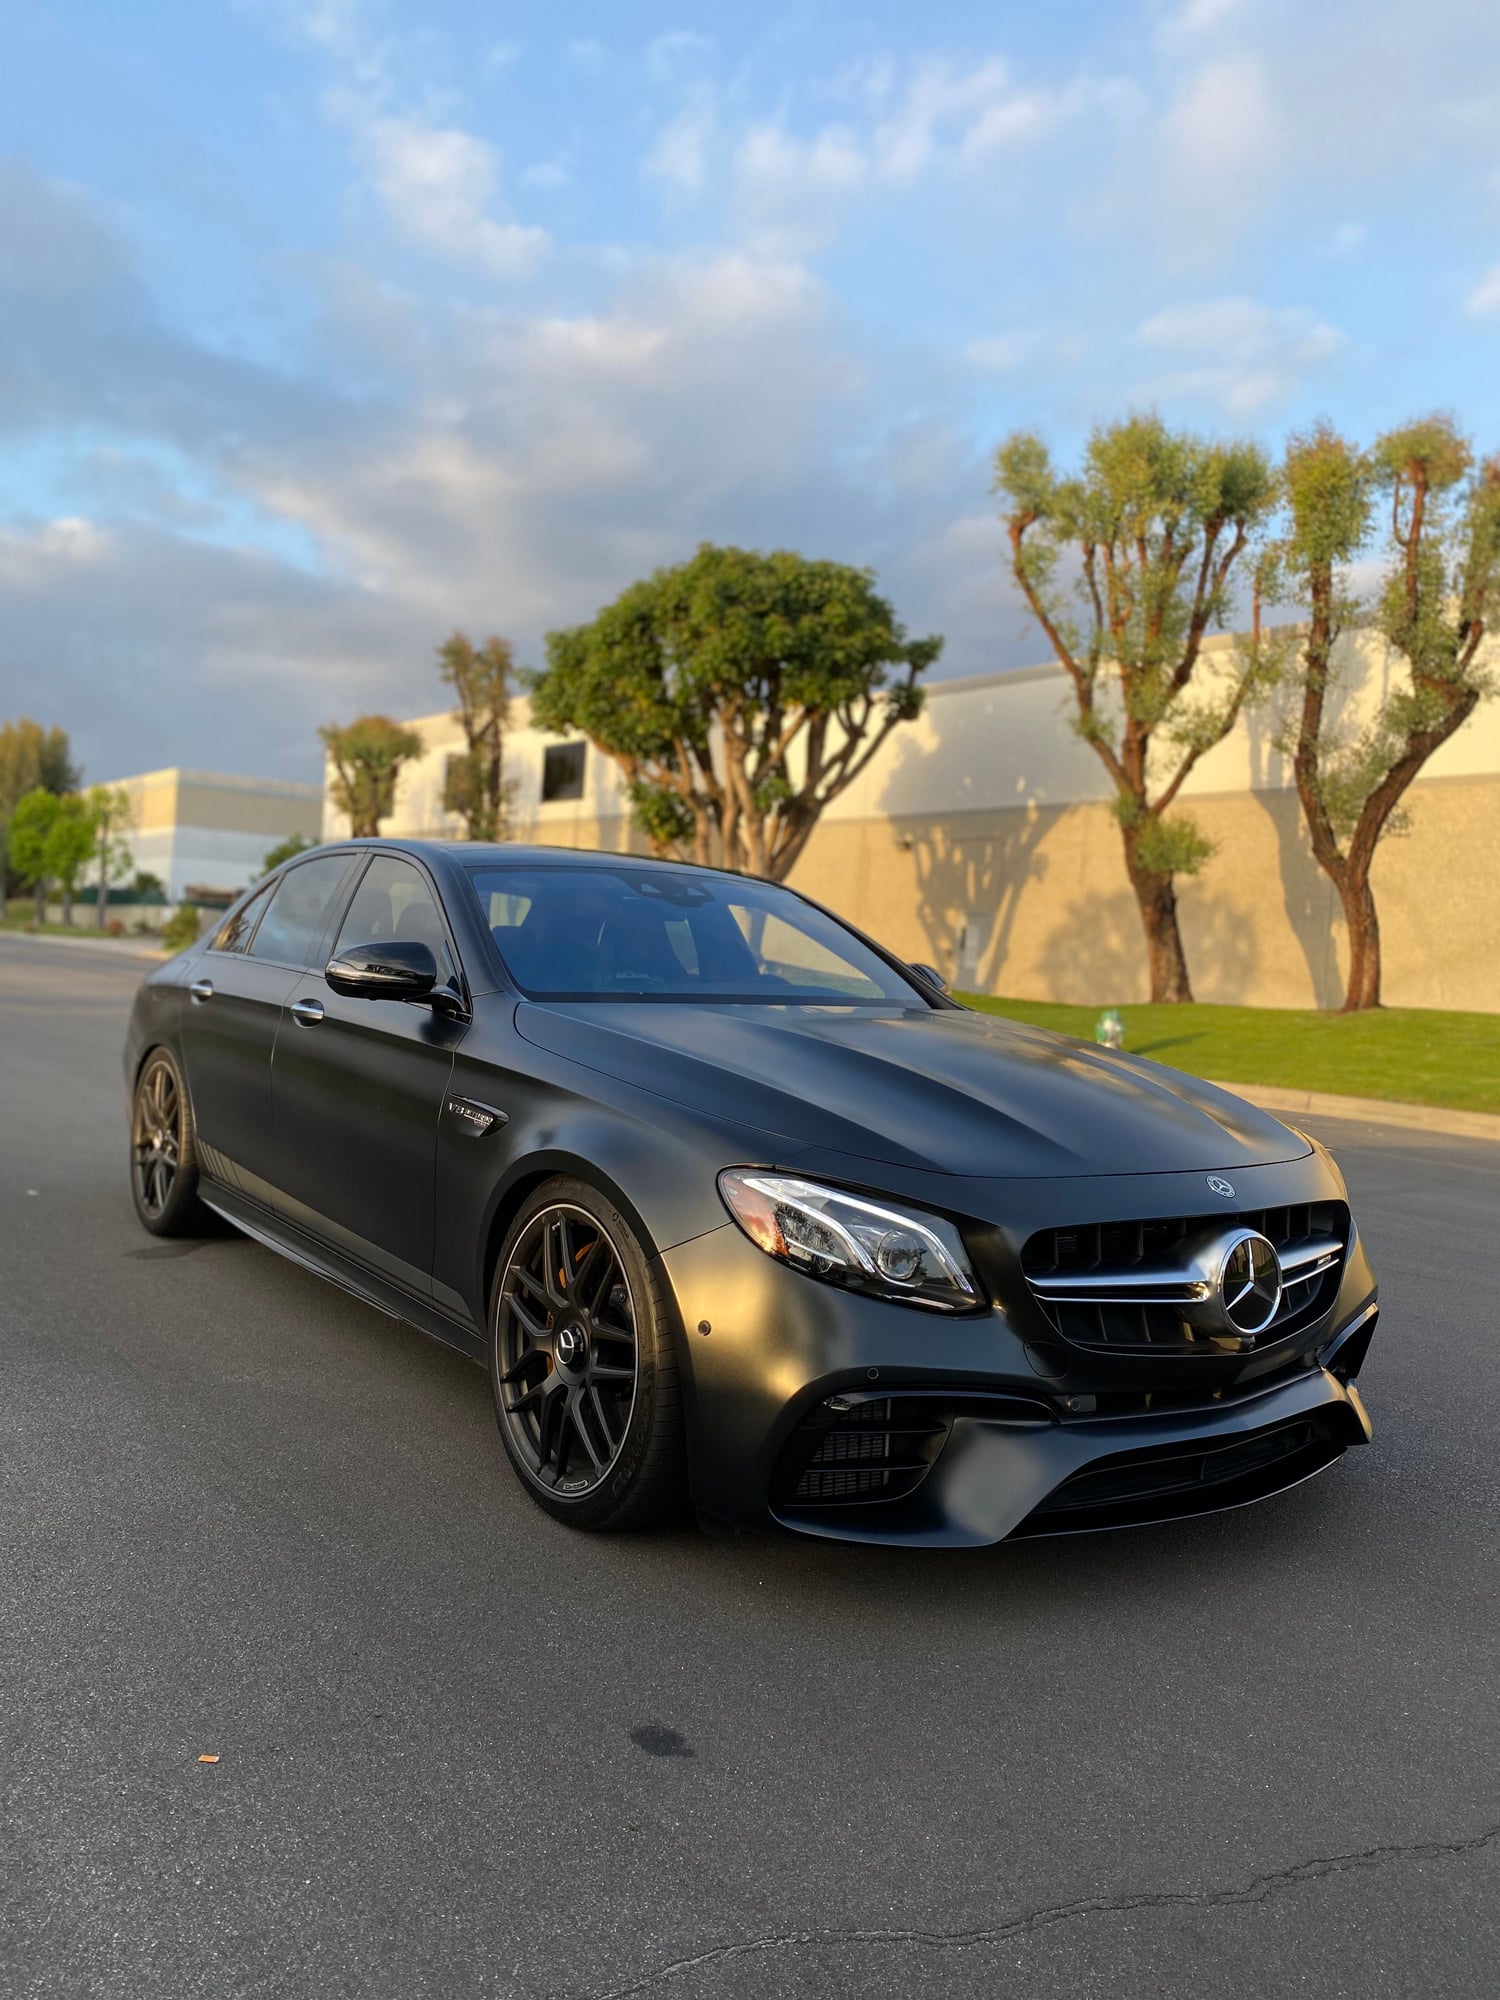 2018 Mercedes-Benz E63 AMG S - 2018 MERCEDES E63S EDITION 1 - Used - Rowland Heights, CA 91748, United States